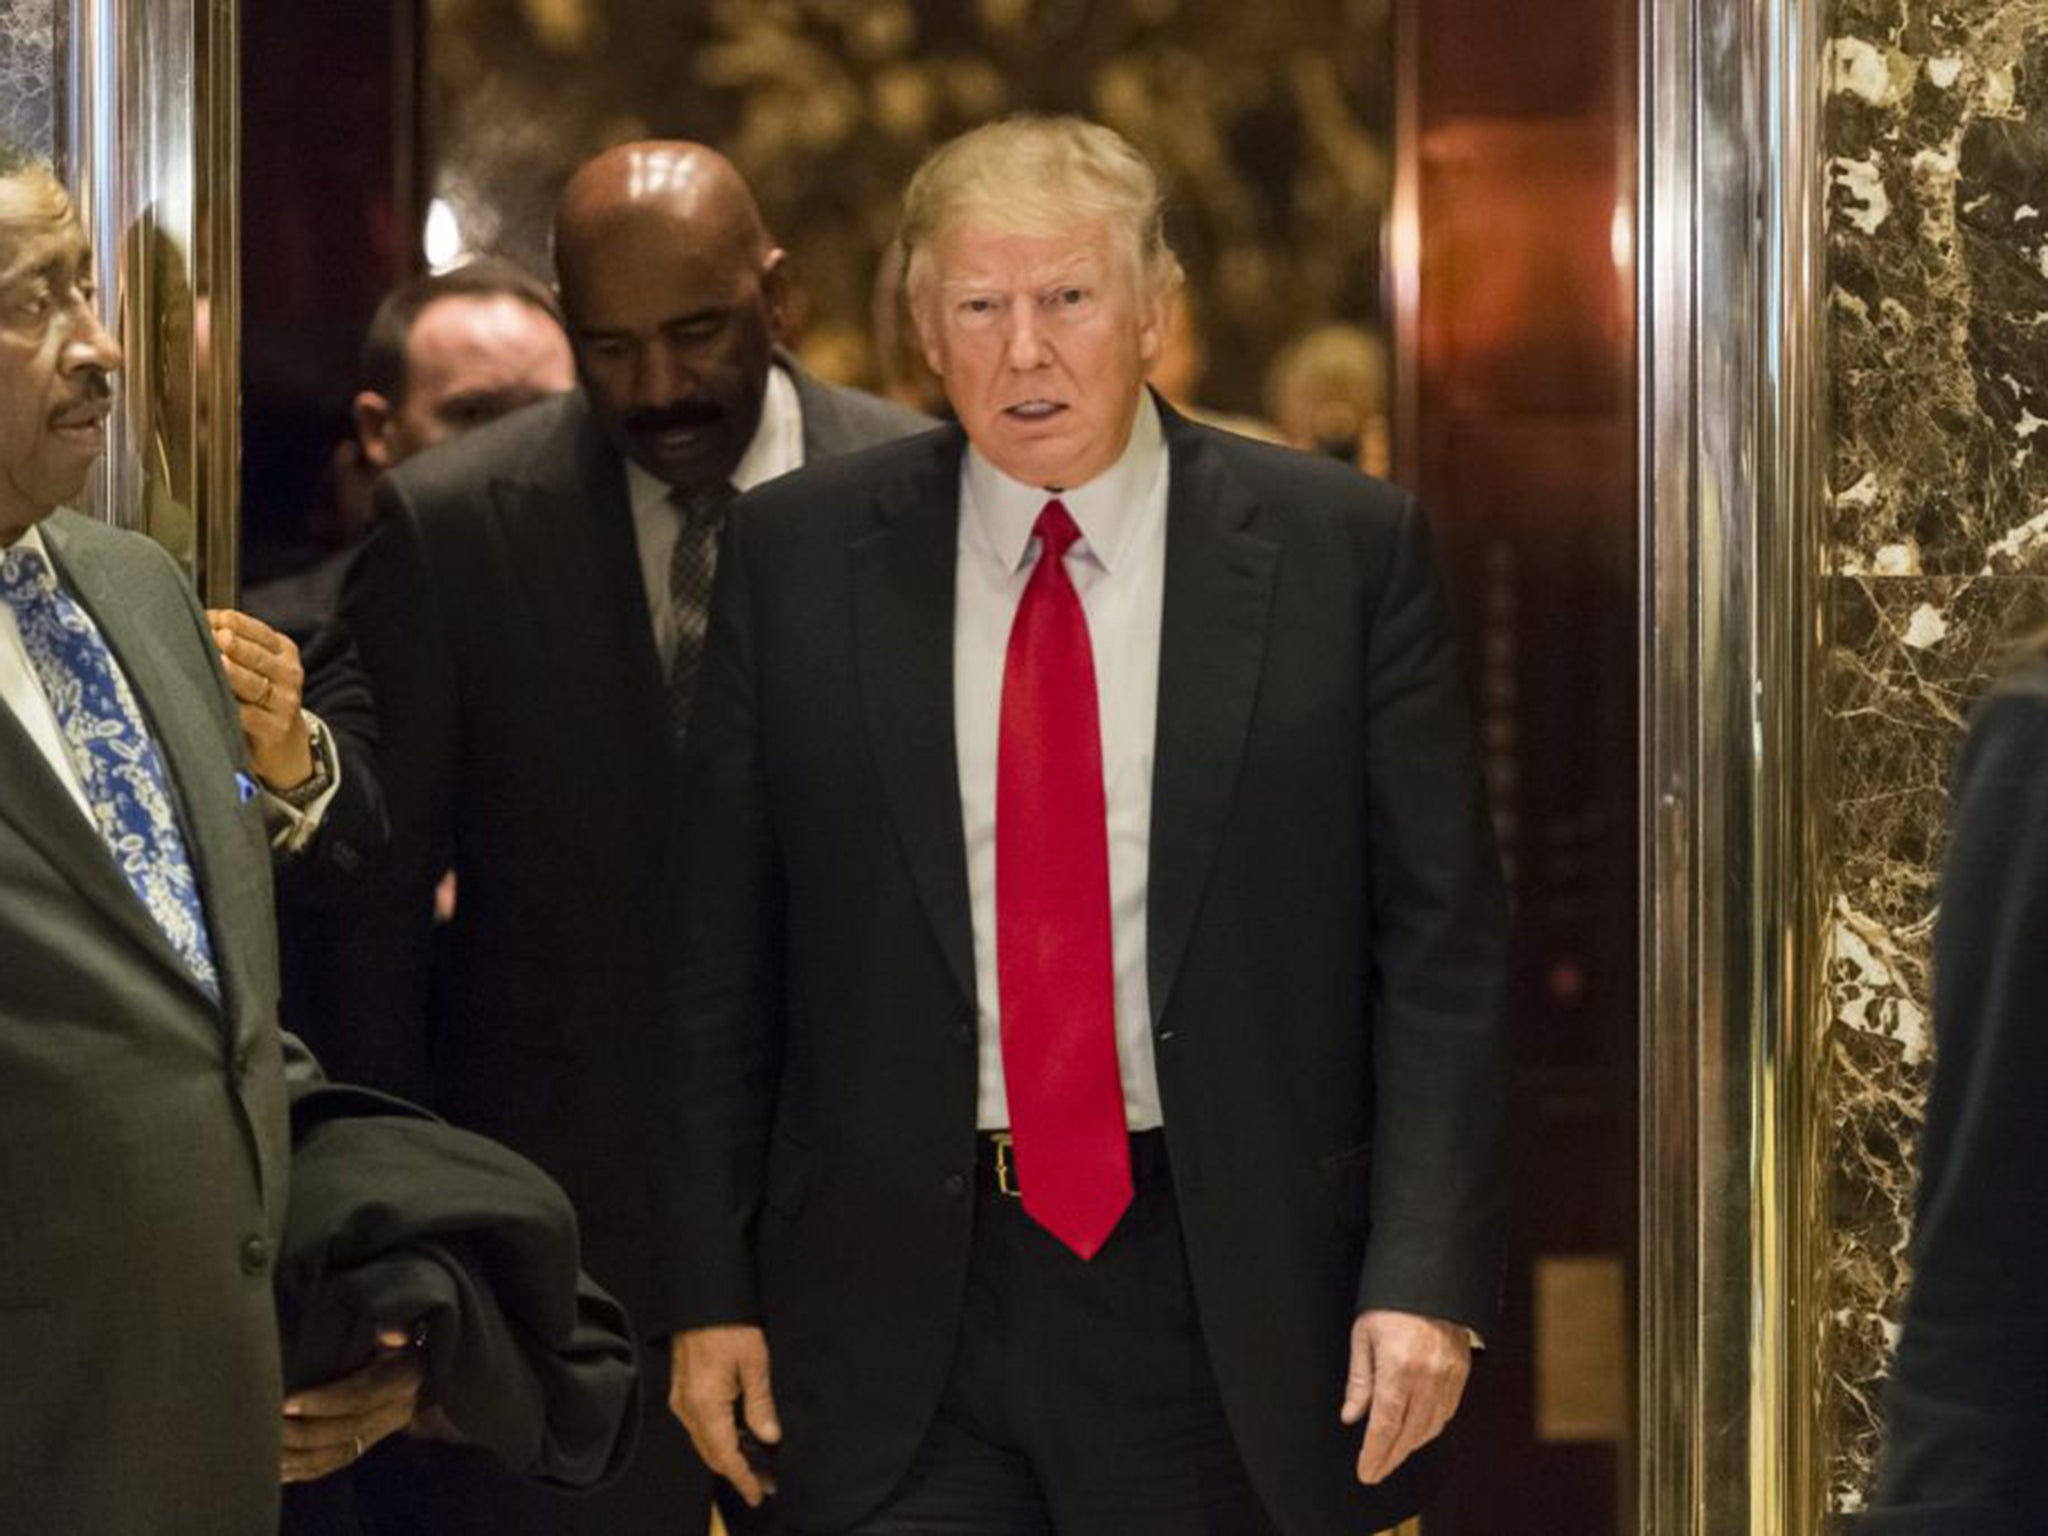 Donald Trump is seen exiting a Trump Tower lift after meeting with US television host Steve Harvey on 13 January 2017